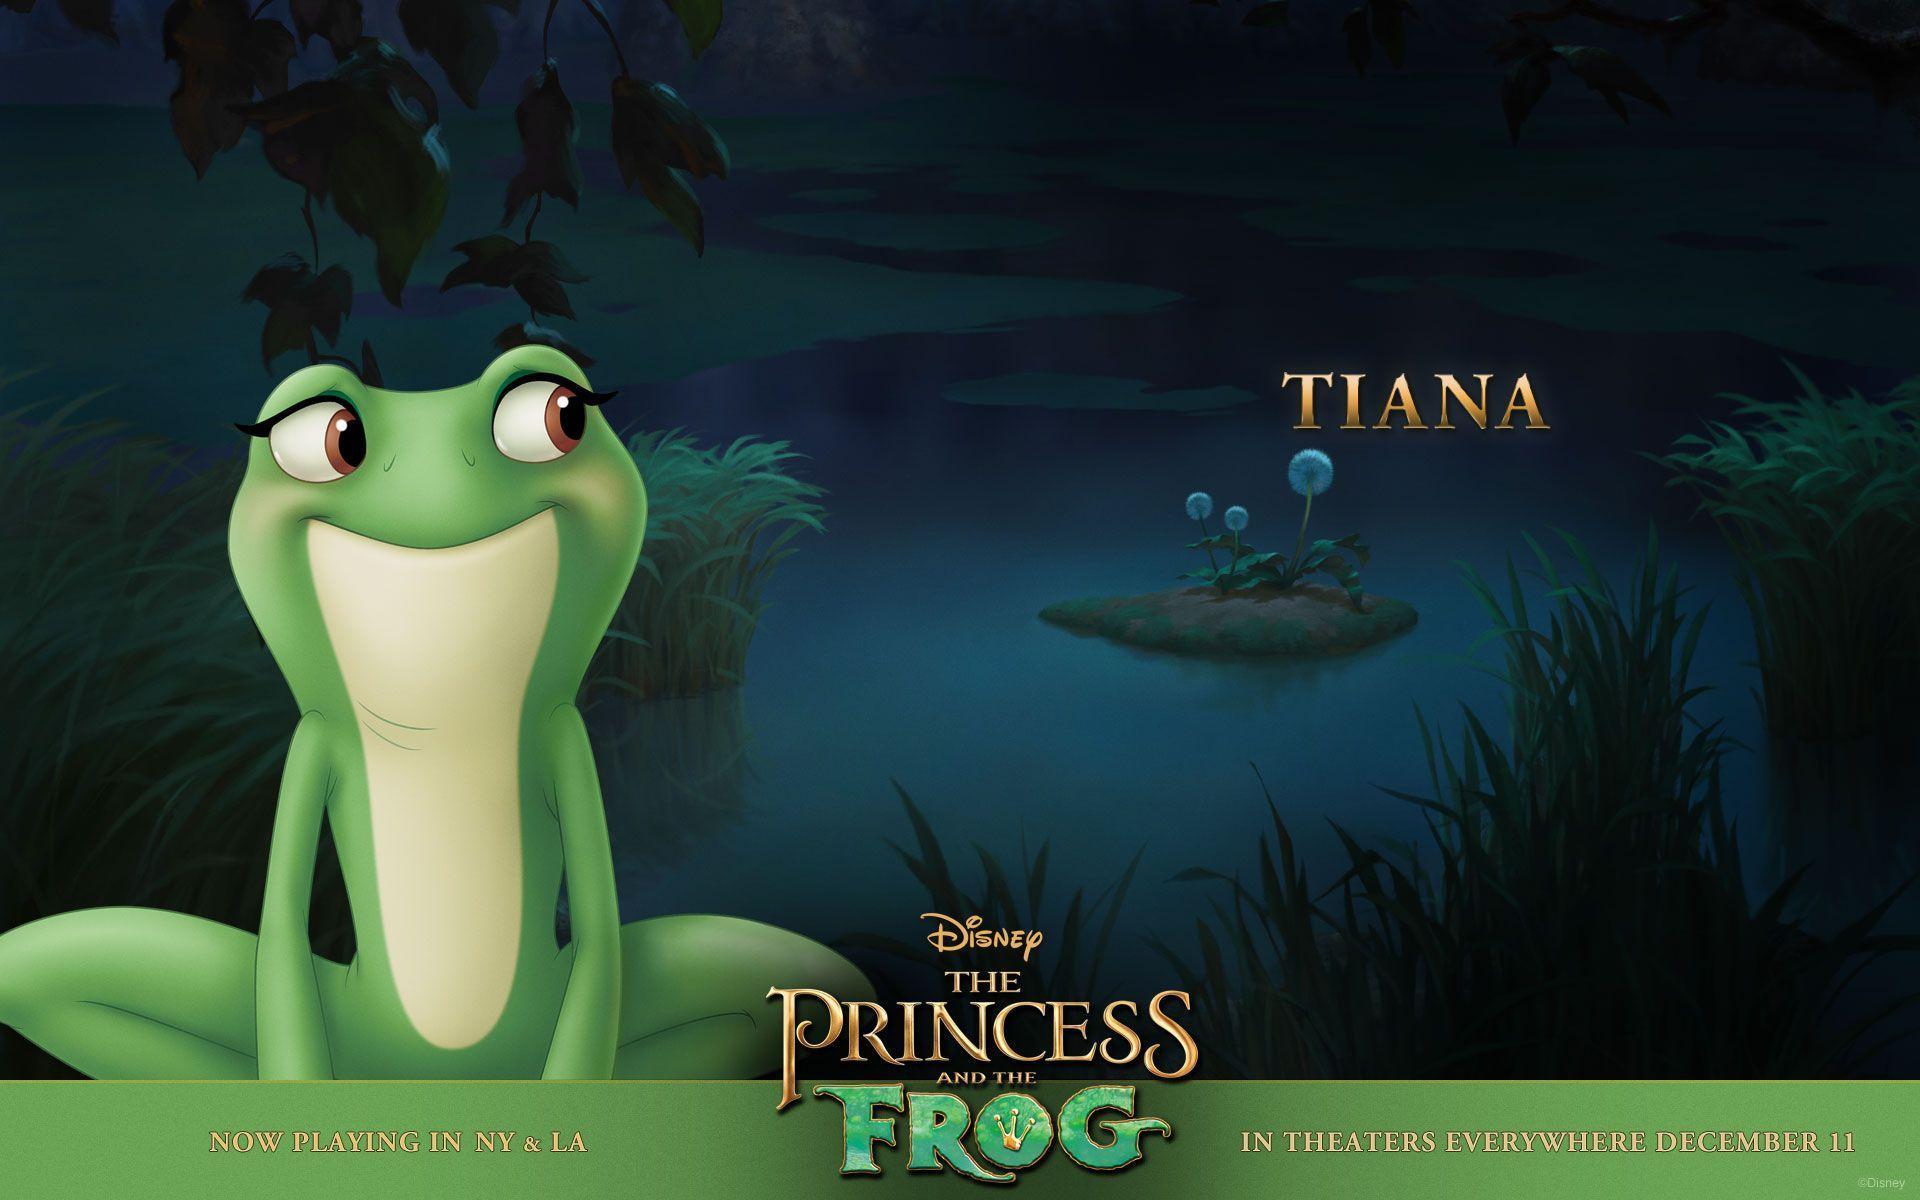 Tiana in the Bayou from Disney's Princess and the Frog Desktop